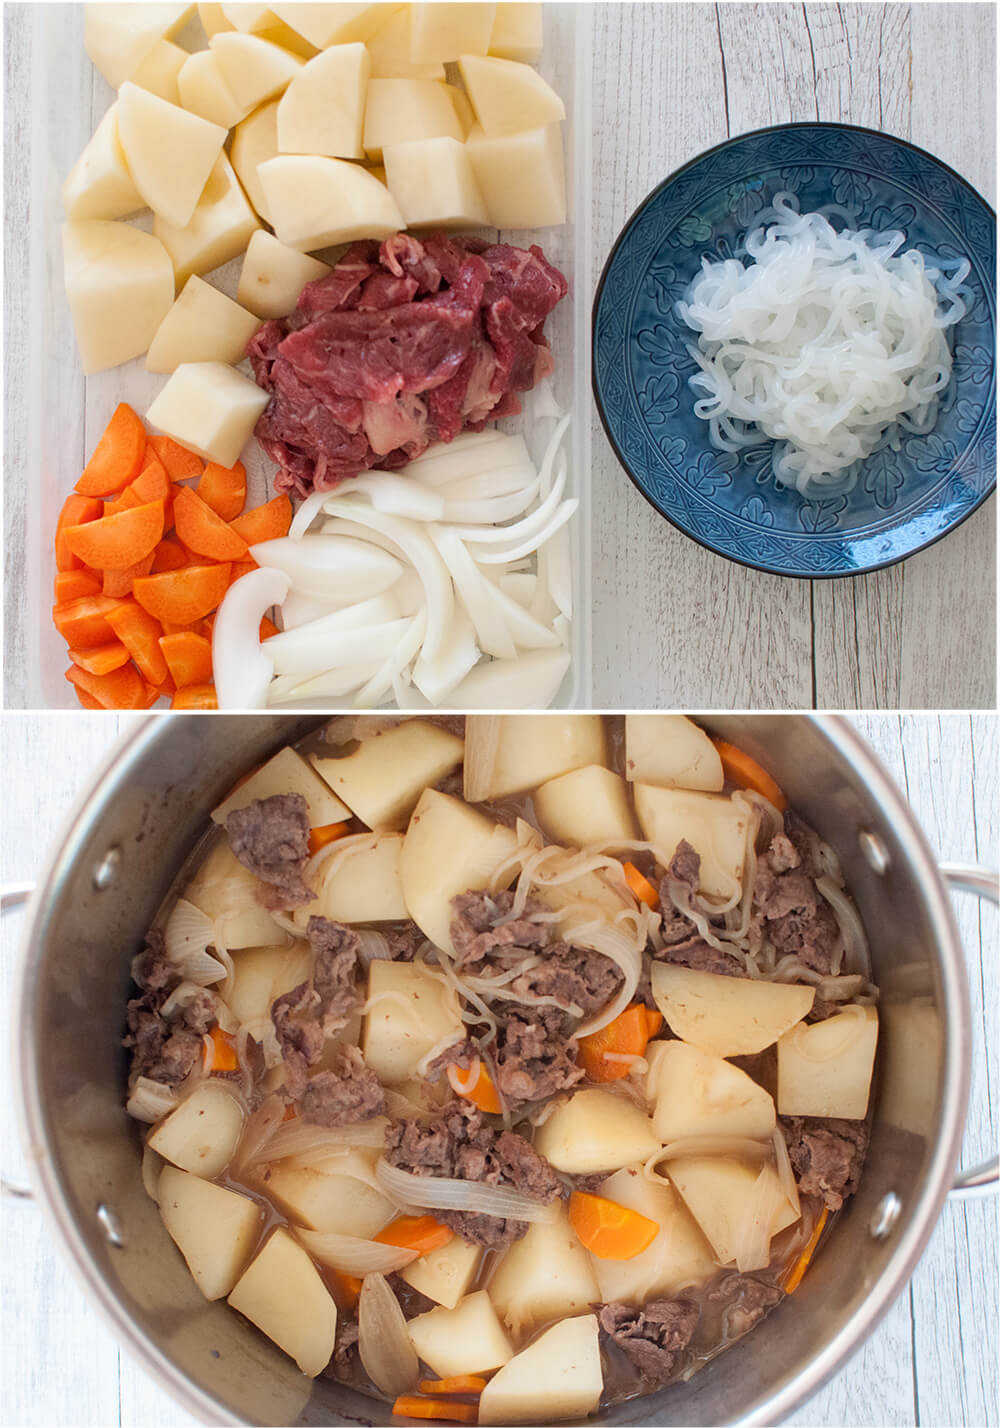 I call it stew but Japanese Meat and Potato Stew is nowhere near the Western style stew. The cooking liquid is based on the usual Japanese flavours of slightly sweetened soy sauce with dashi stock, but is not thickened.